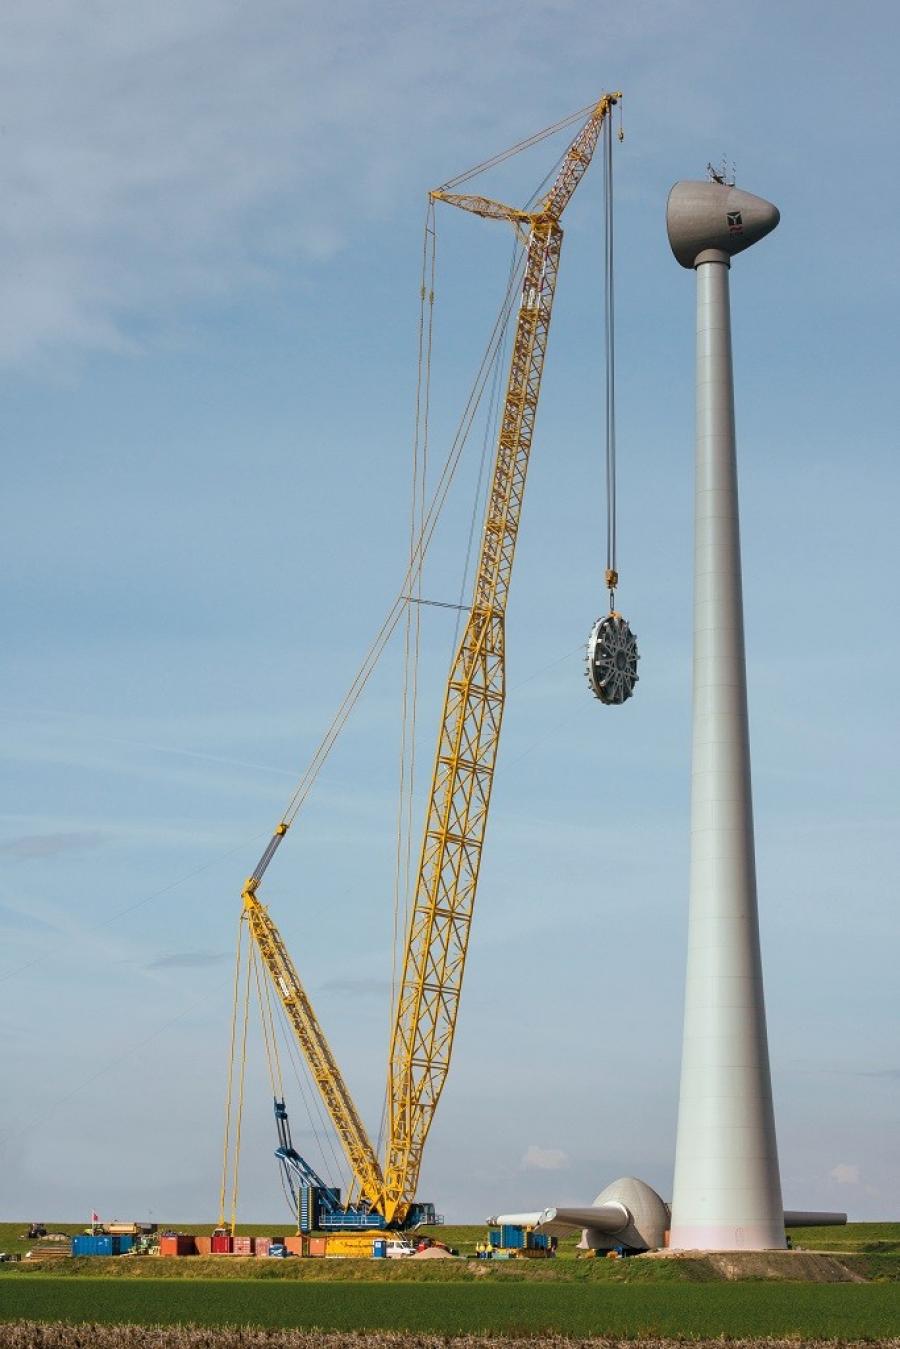 In its standard configuration, the Demag CC 8800-1 crawler crane has a maximum capacity of 1,760 tons (1,600 t) and maximum tip/sheave height of 709 ft. (216 m). The boom booster kit can extend lift capacities by up to 90 percent.